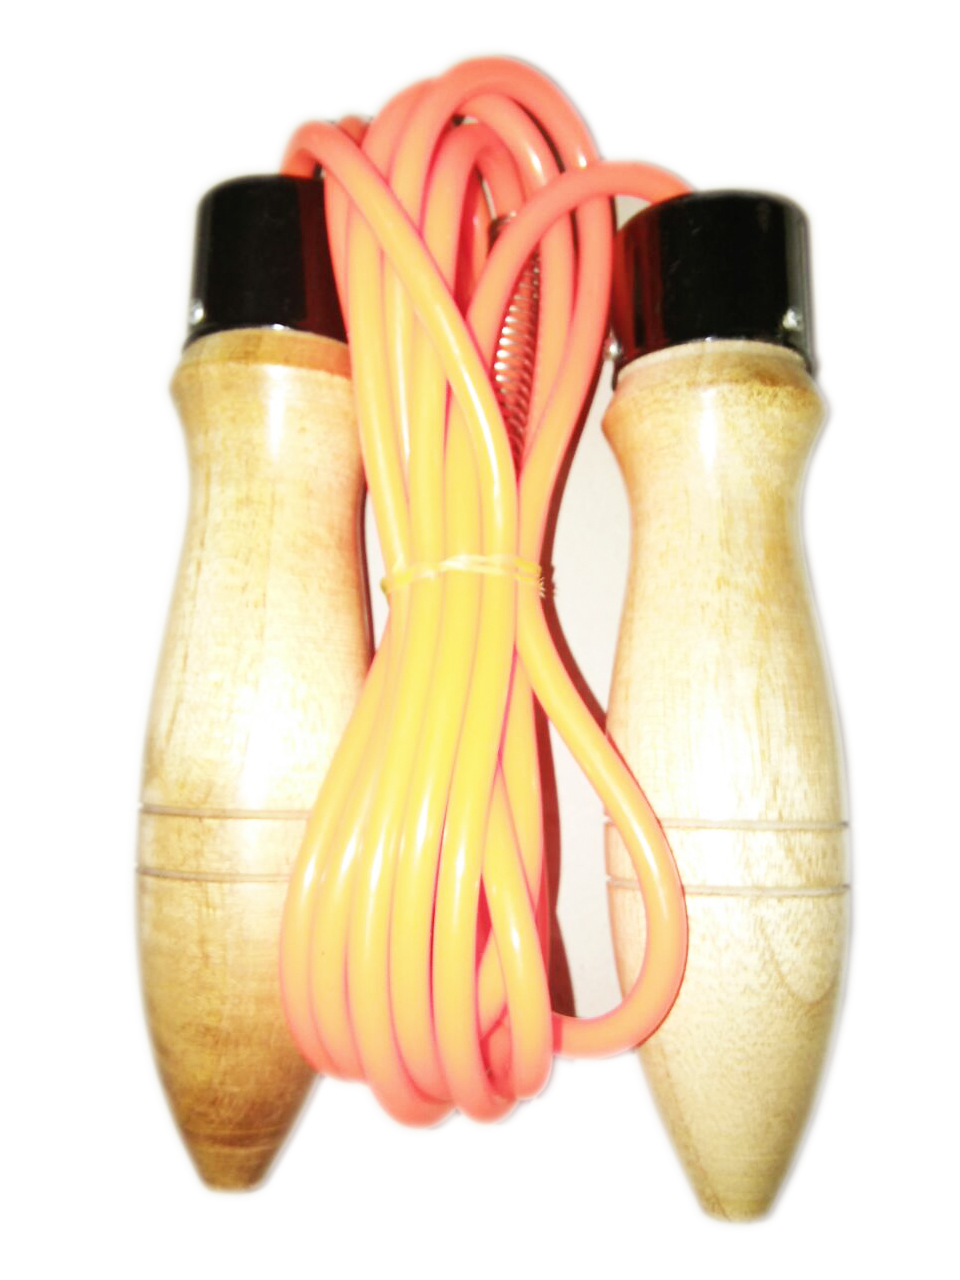 PVC Skipping rope with Wooden Handle